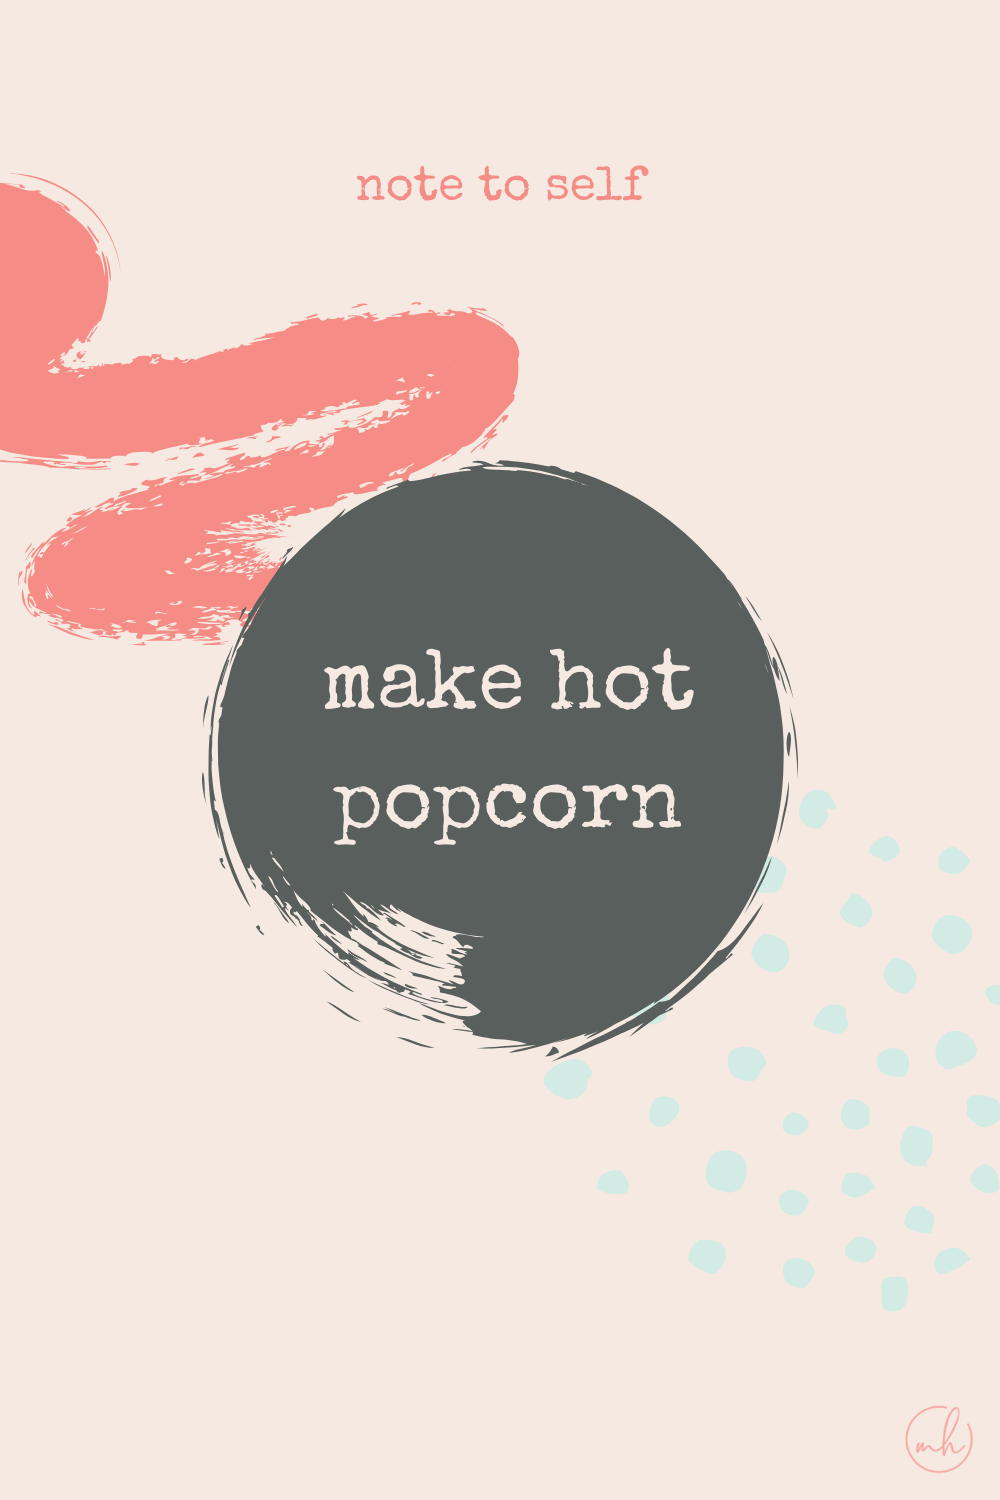 Make hot popcorn - Note to self quotes | myhoogah